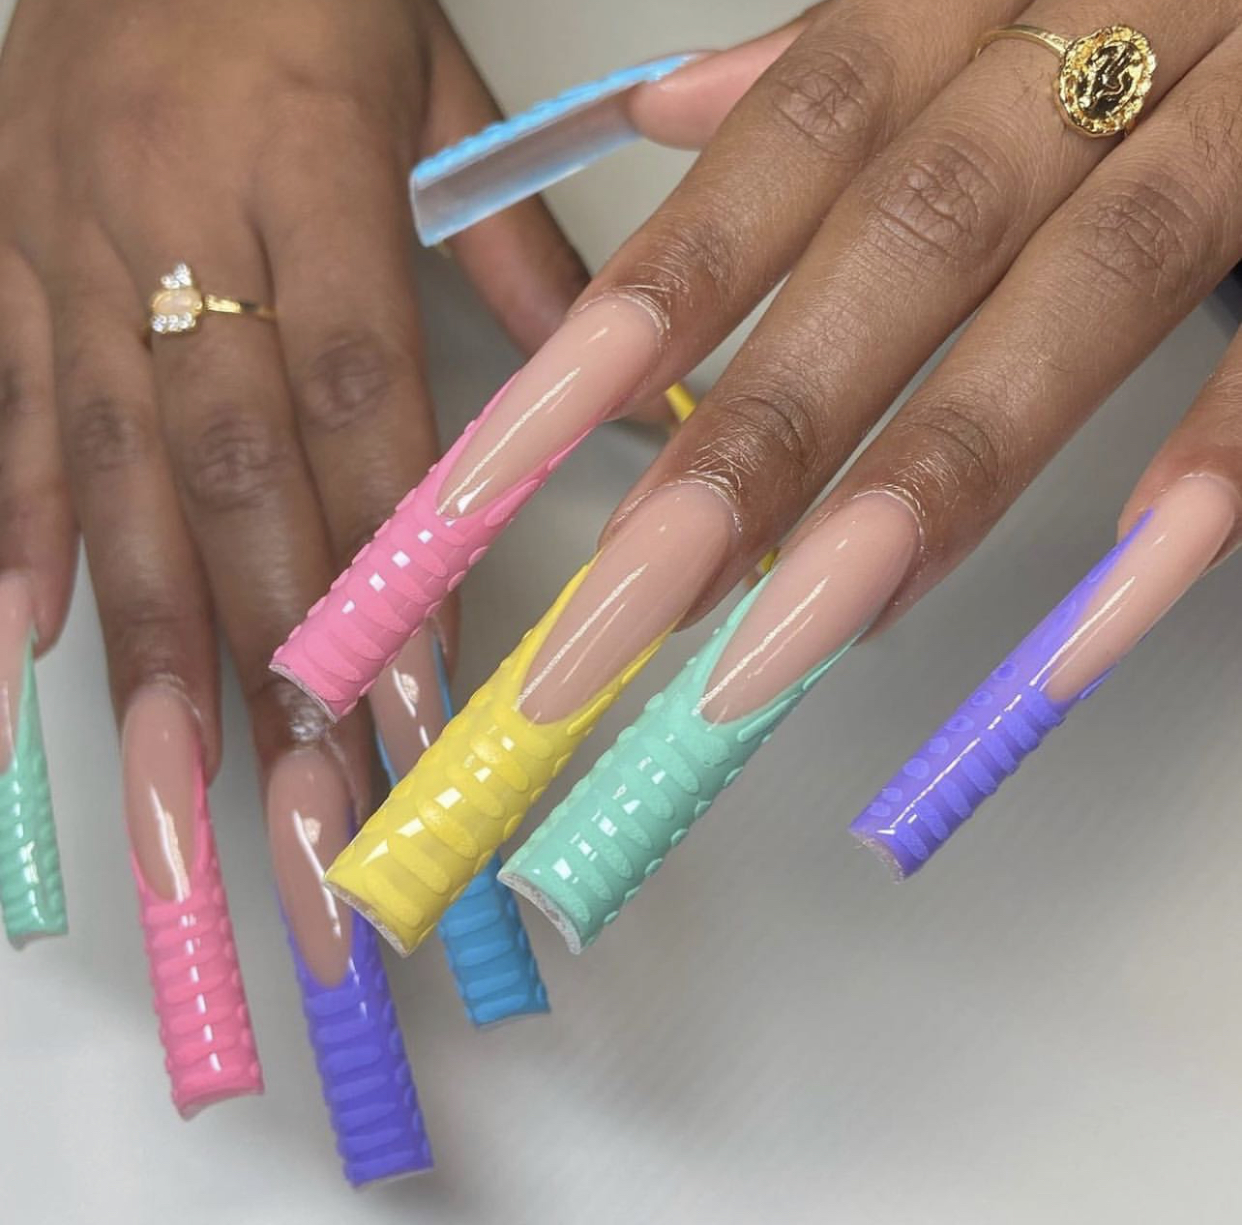 Nude Acrylic Nails With Multi-colored Croc Tips